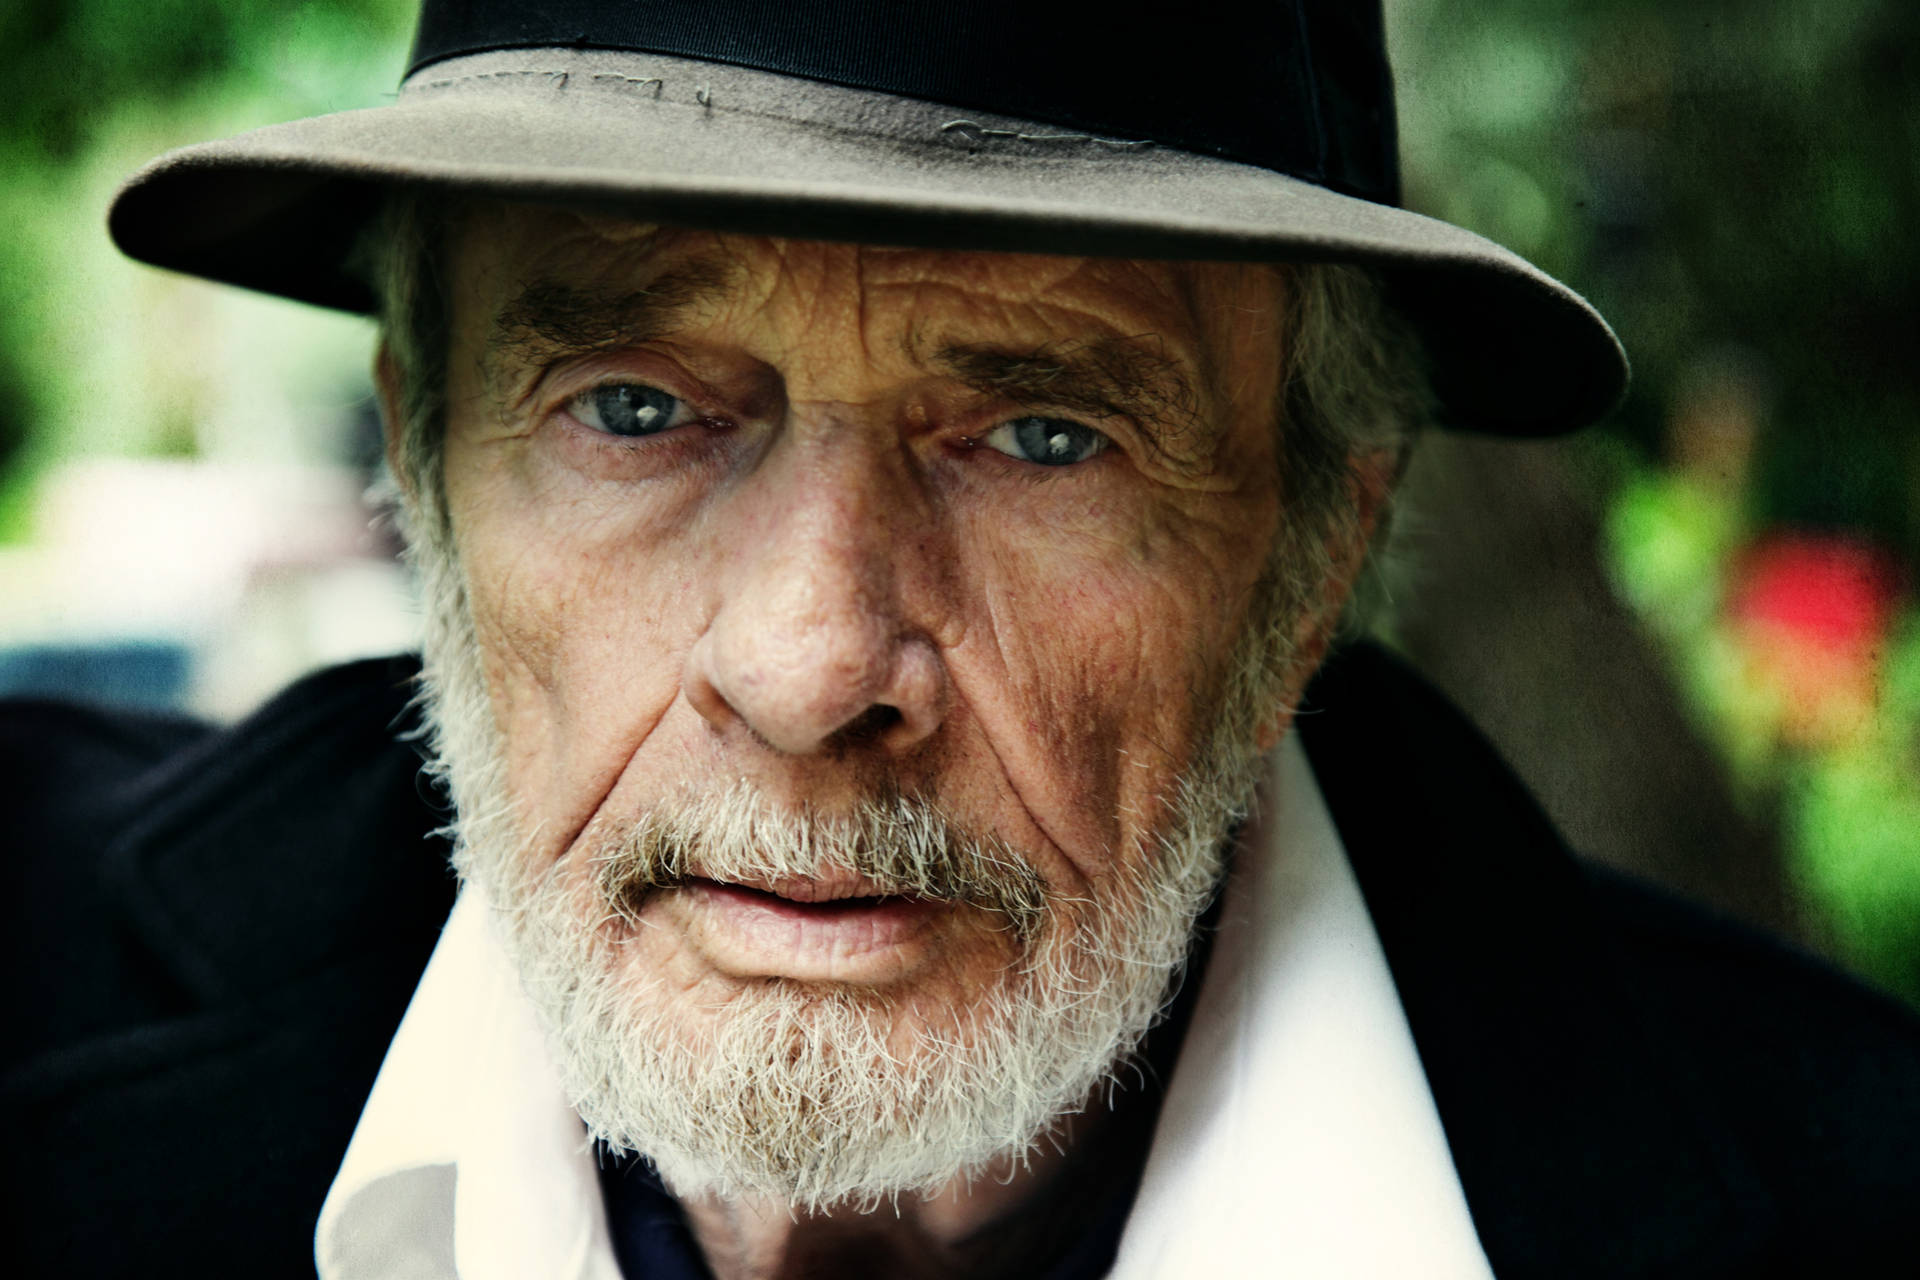 A classic black and white portrait of the legendary country music artist, Merle Haggard. Wallpaper